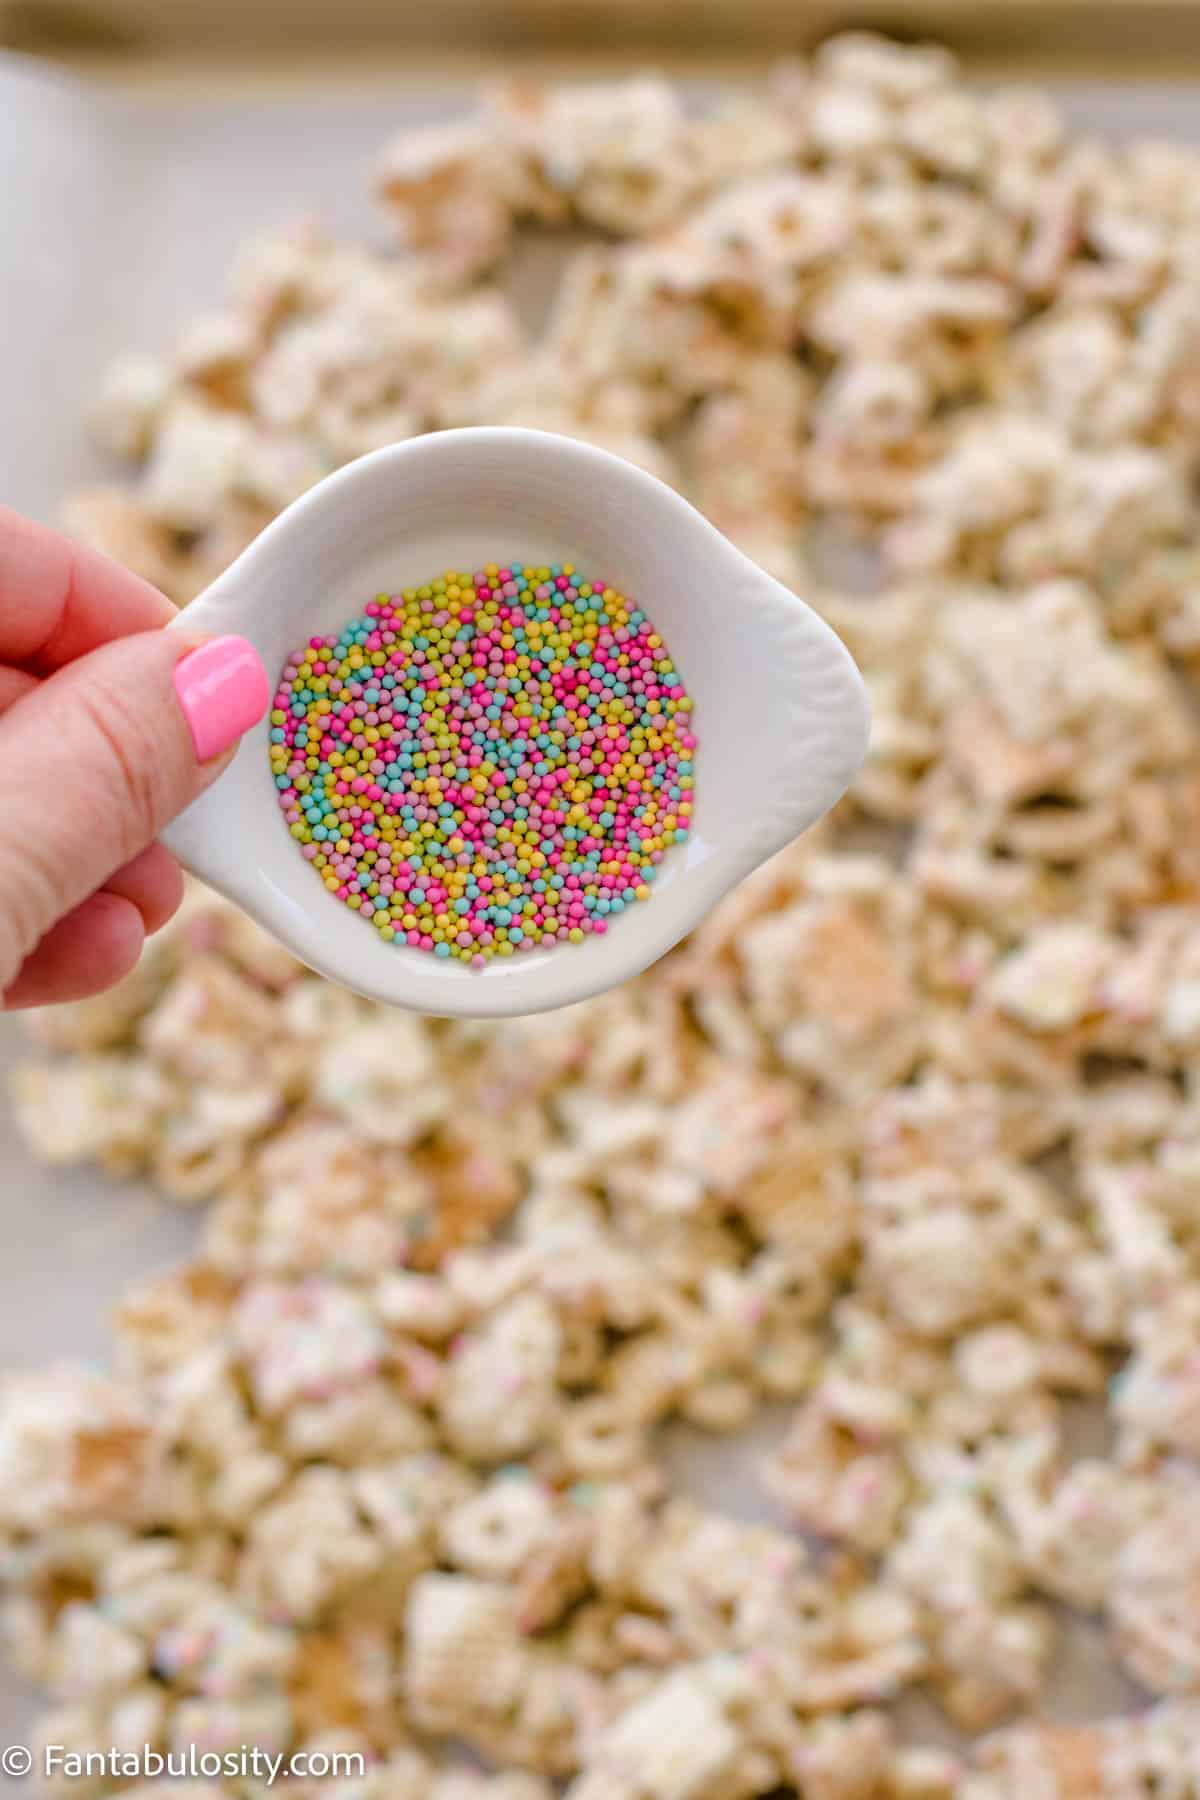 Pour more sprinkles on cereal